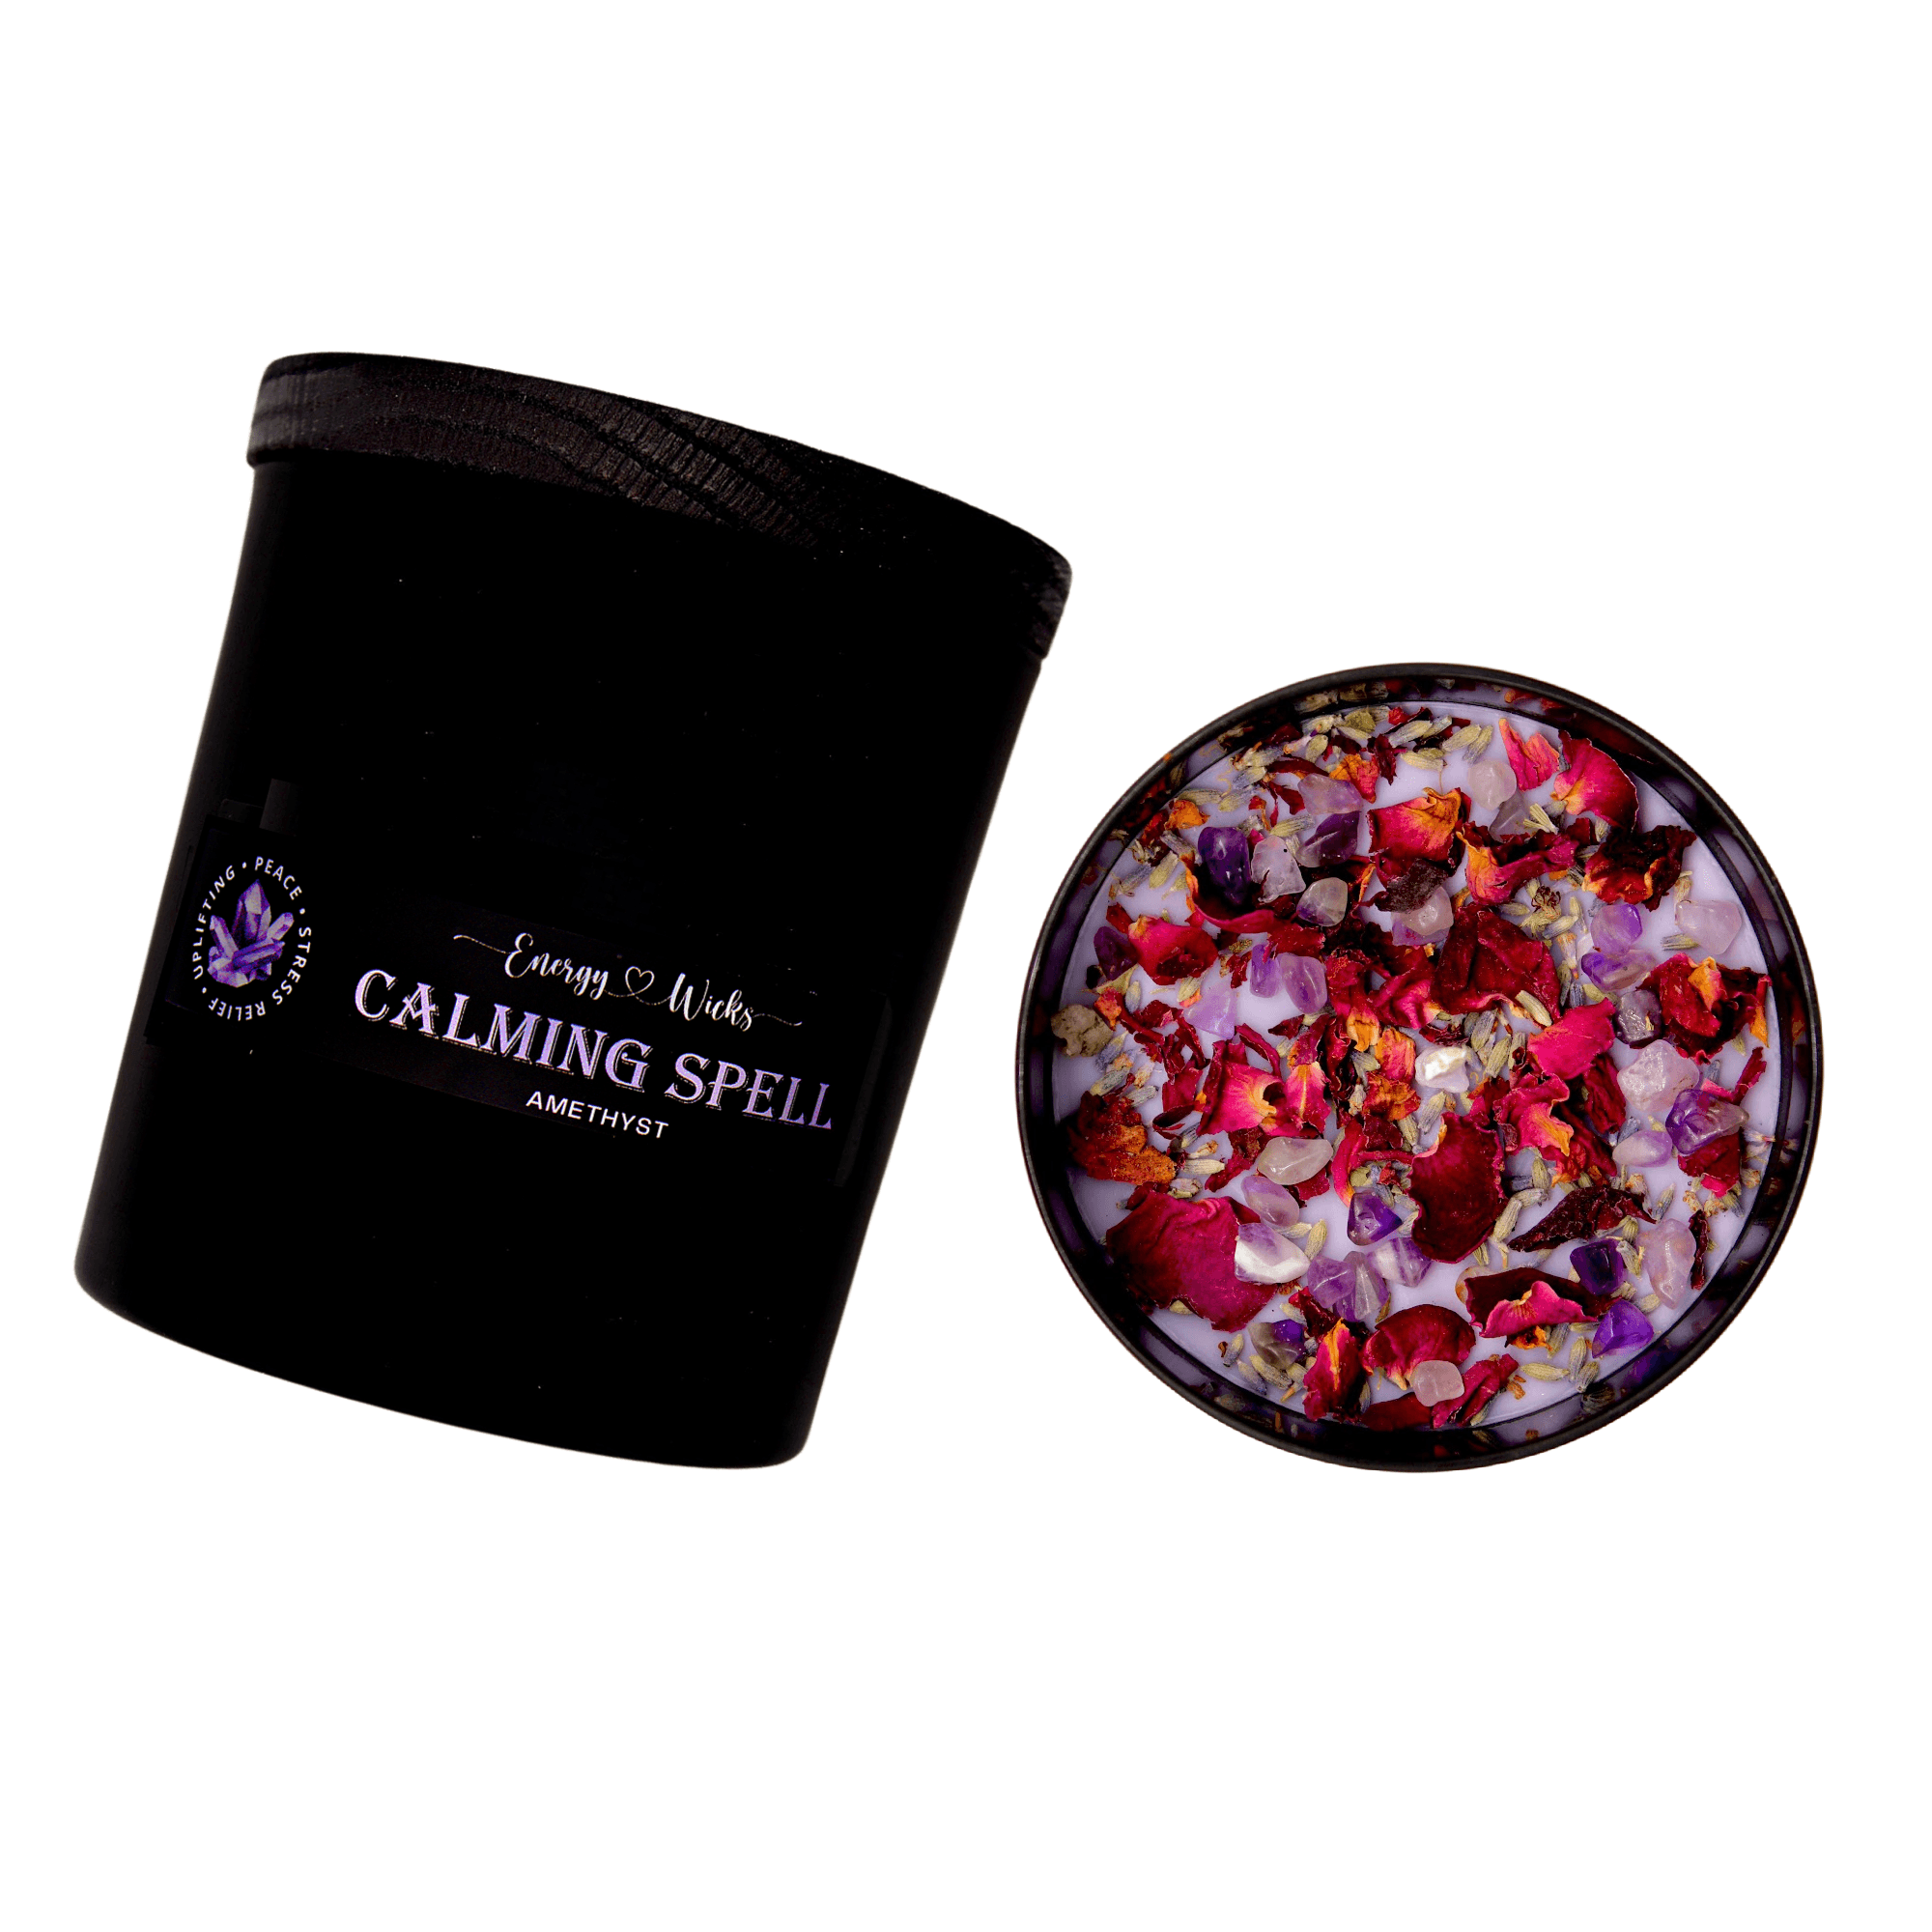 Amethyst floral Candle - Energy Wicks